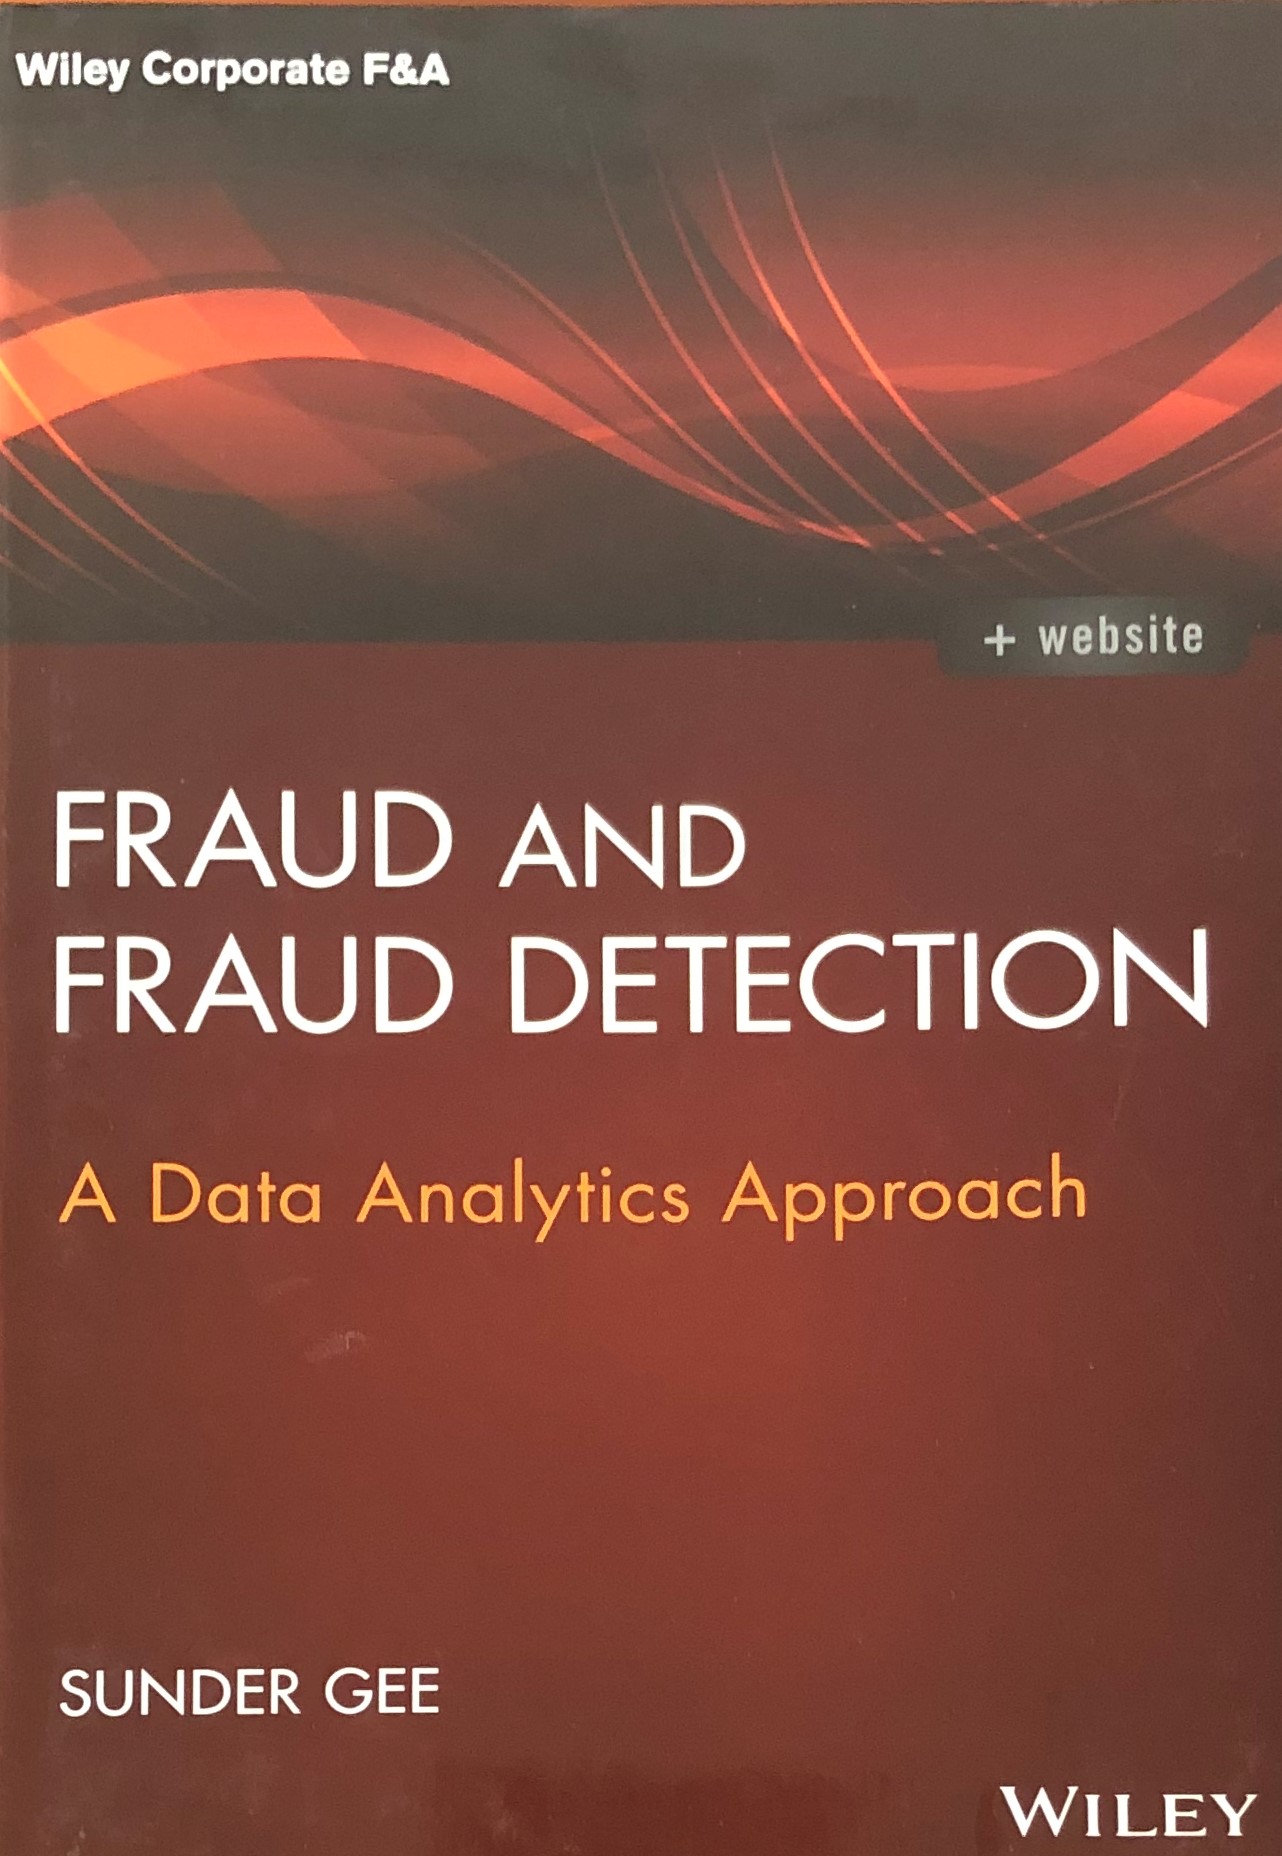 Description Fraud and Fraud Detection: A Date Analytics Approach